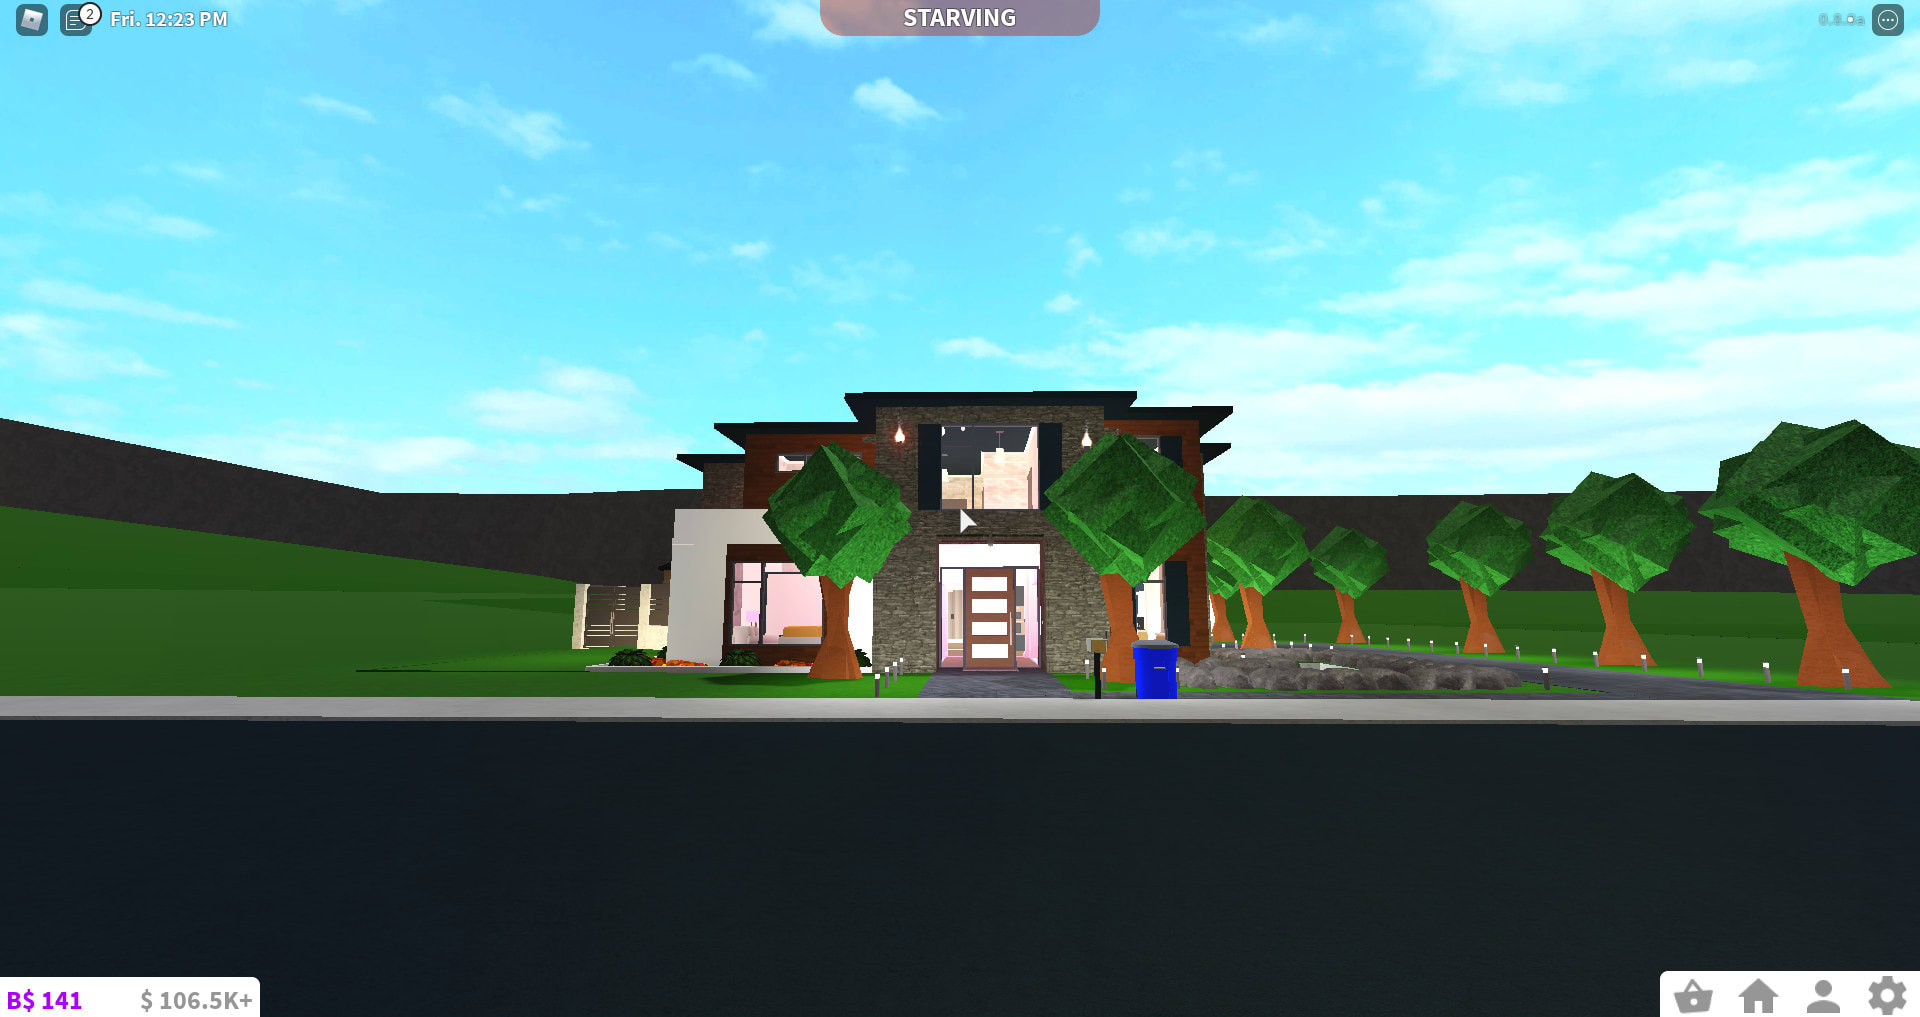 Build Houses In Bloxburg Gamepass Or No Gamepass By Alexandra Poch - bloxburg houses roblox with no passes